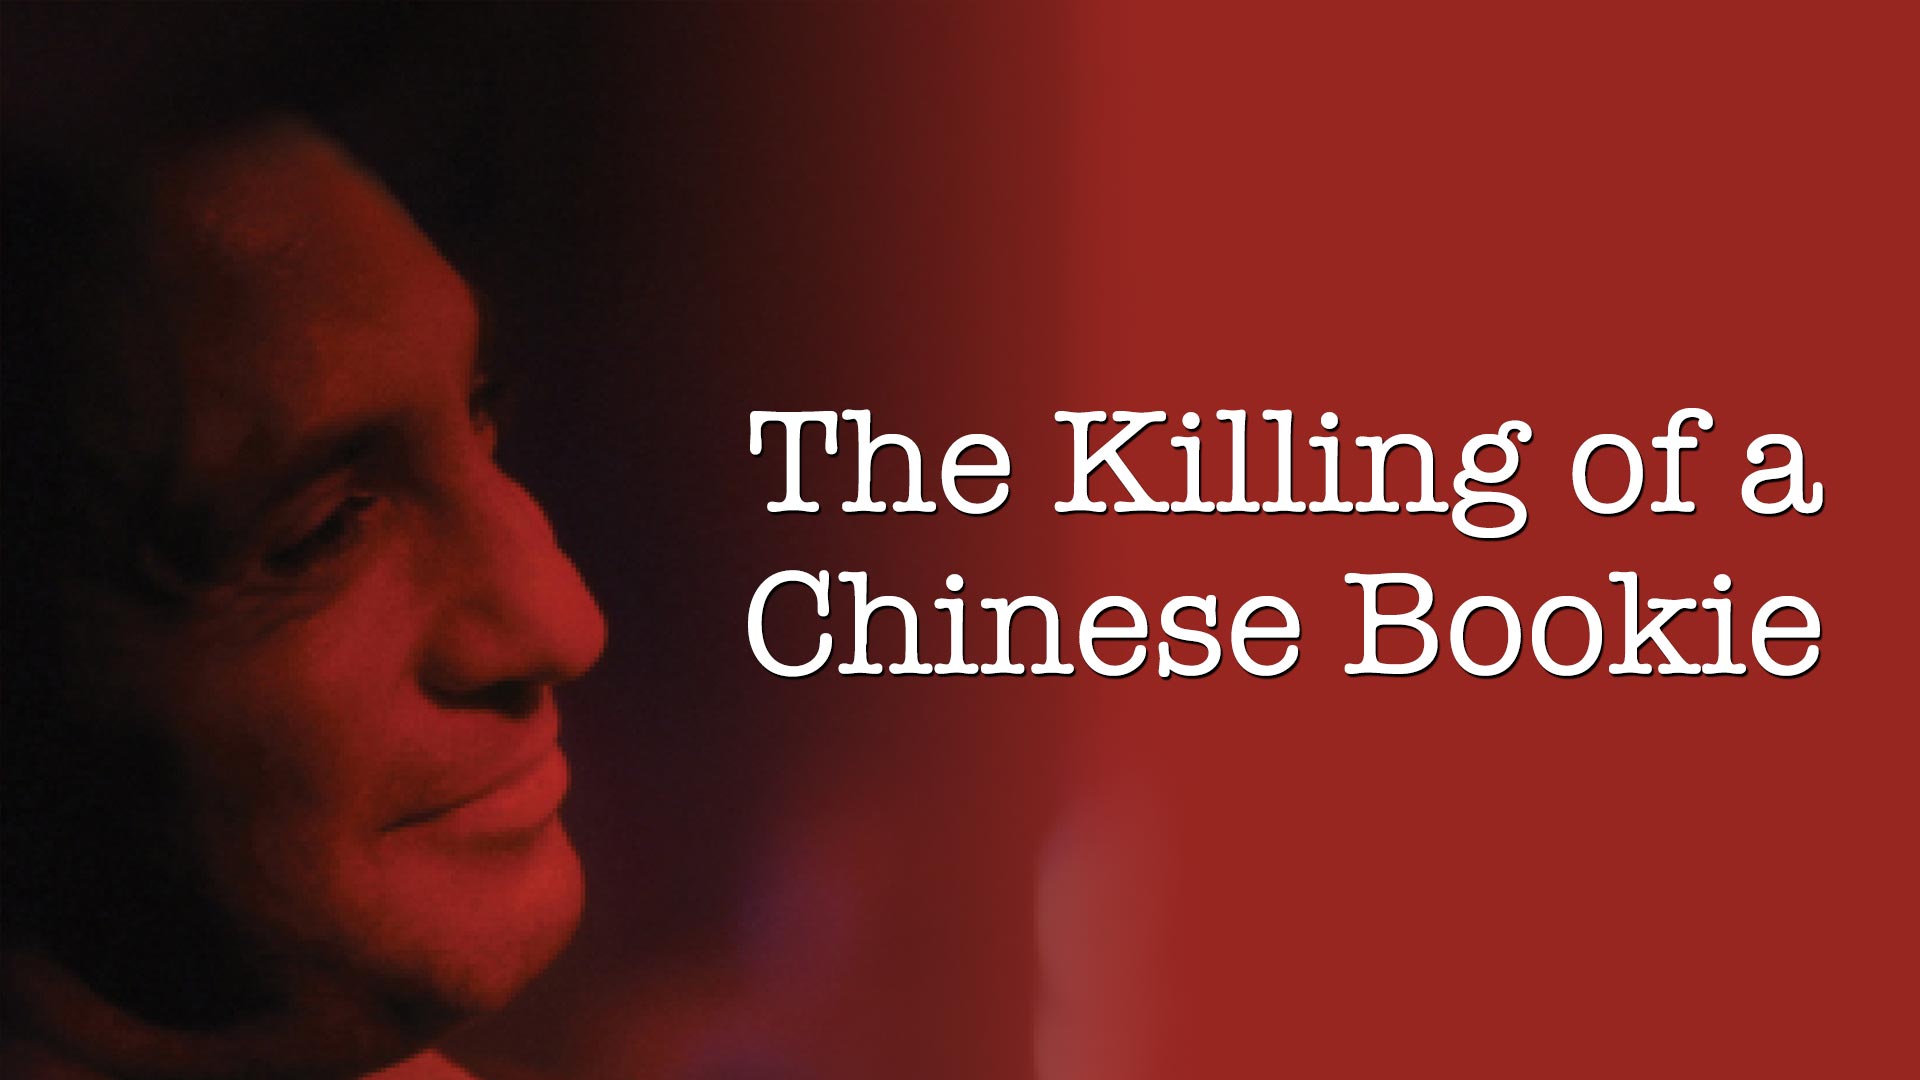 47-facts-about-the-movie-the-killing-of-a-chinese-bookie